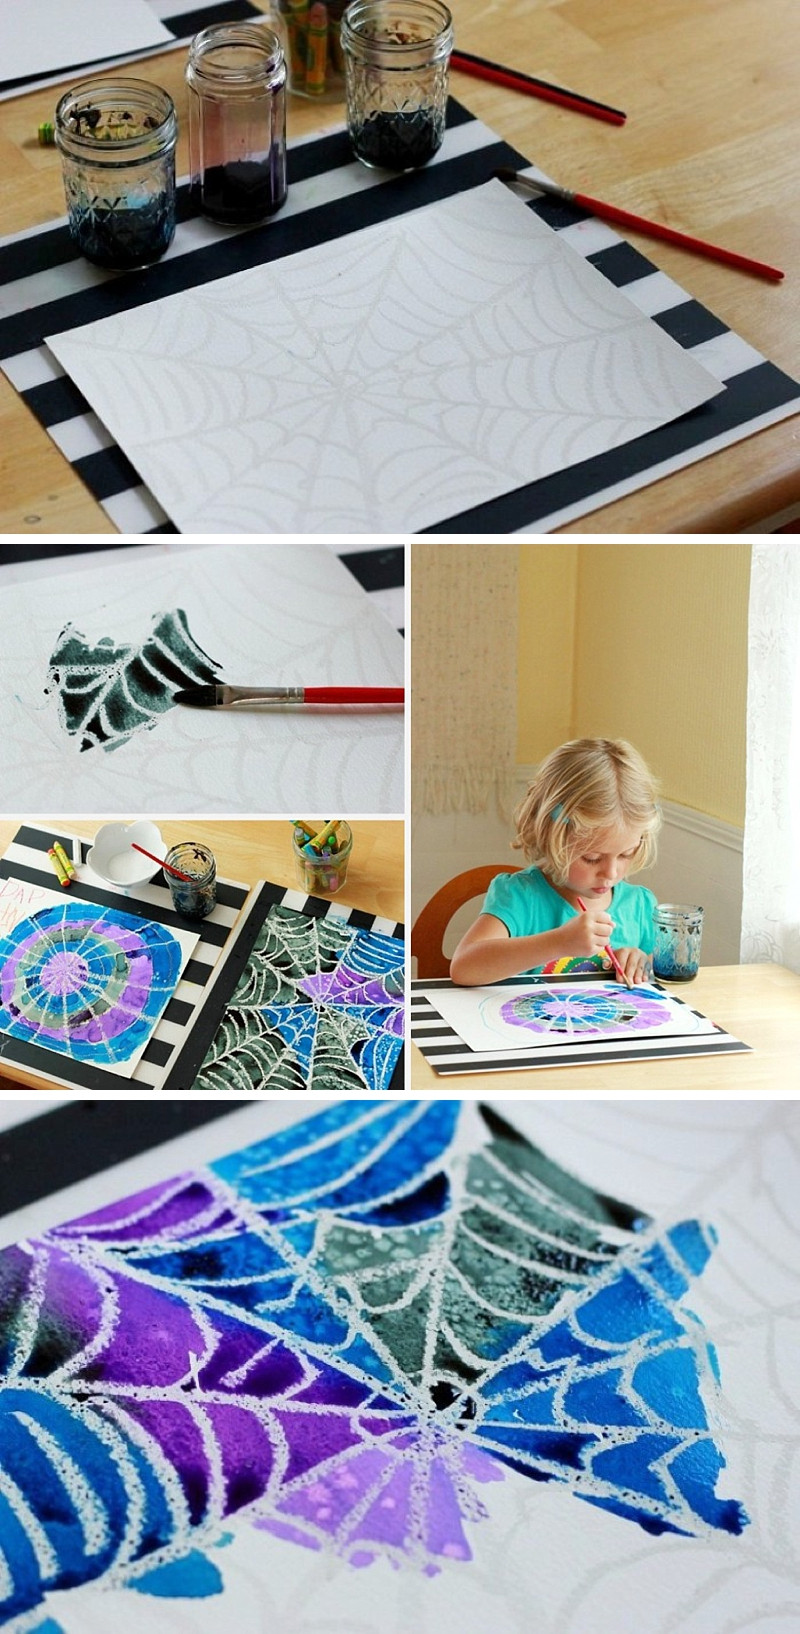 Craft Projects For Toddlers
 Spider Web Art Project A Simple and Beautiful